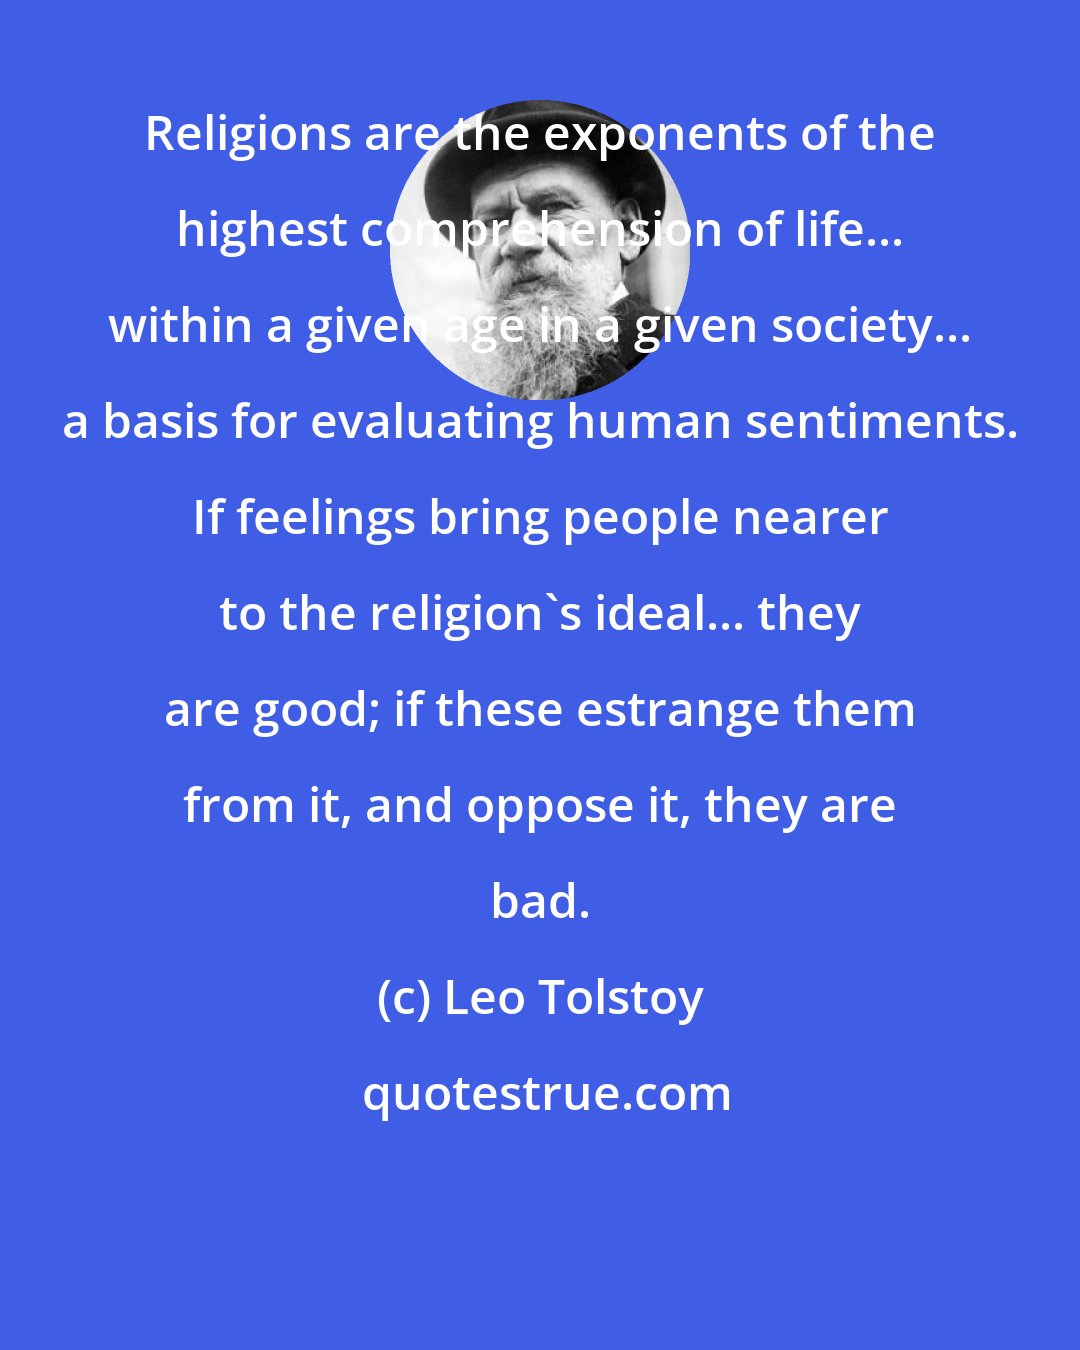 Leo Tolstoy: Religions are the exponents of the highest comprehension of life... within a given age in a given society... a basis for evaluating human sentiments. If feelings bring people nearer to the religion's ideal... they are good; if these estrange them from it, and oppose it, they are bad.